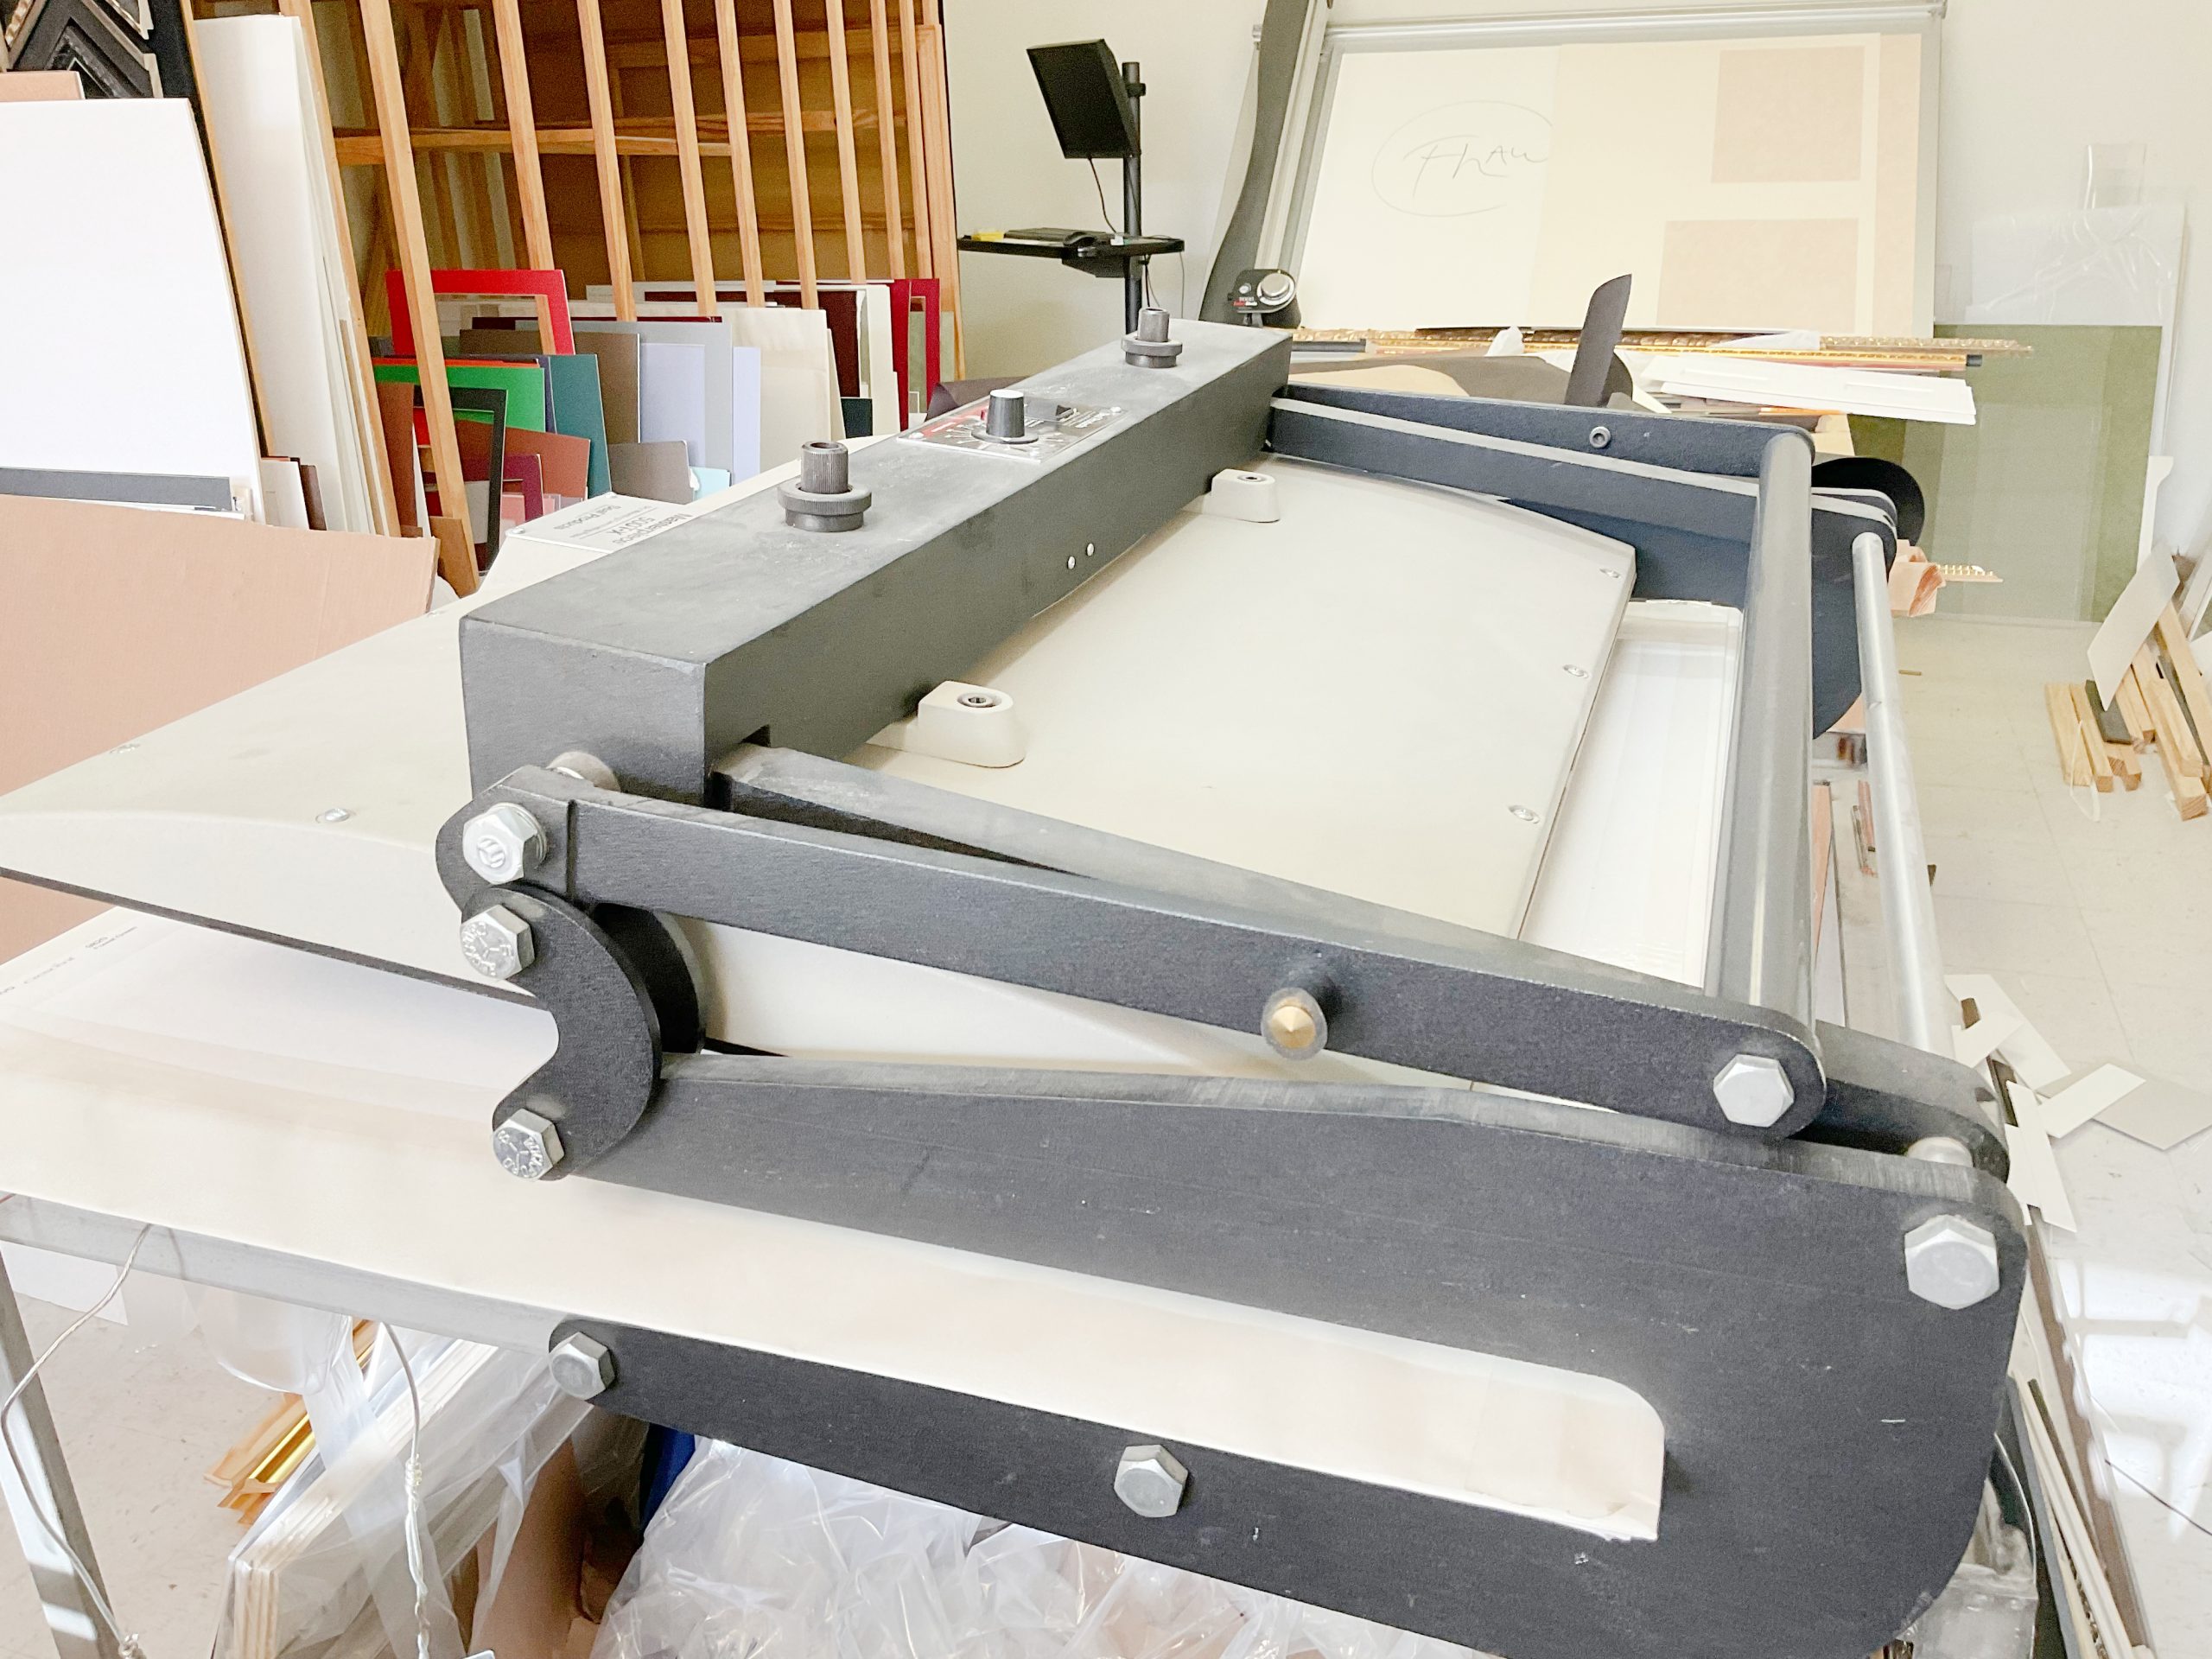 Picture Framing Equipment Lot: Brevetti Prisma Maxi Double Miter Saw, Cassese CS299M Underpinner, Seal Masterpiece 500 T-X Dry Mount Press, & Fletcher-Terry 3100 Multi Material Cutter (Used) Item # UE-050222A (Texas)